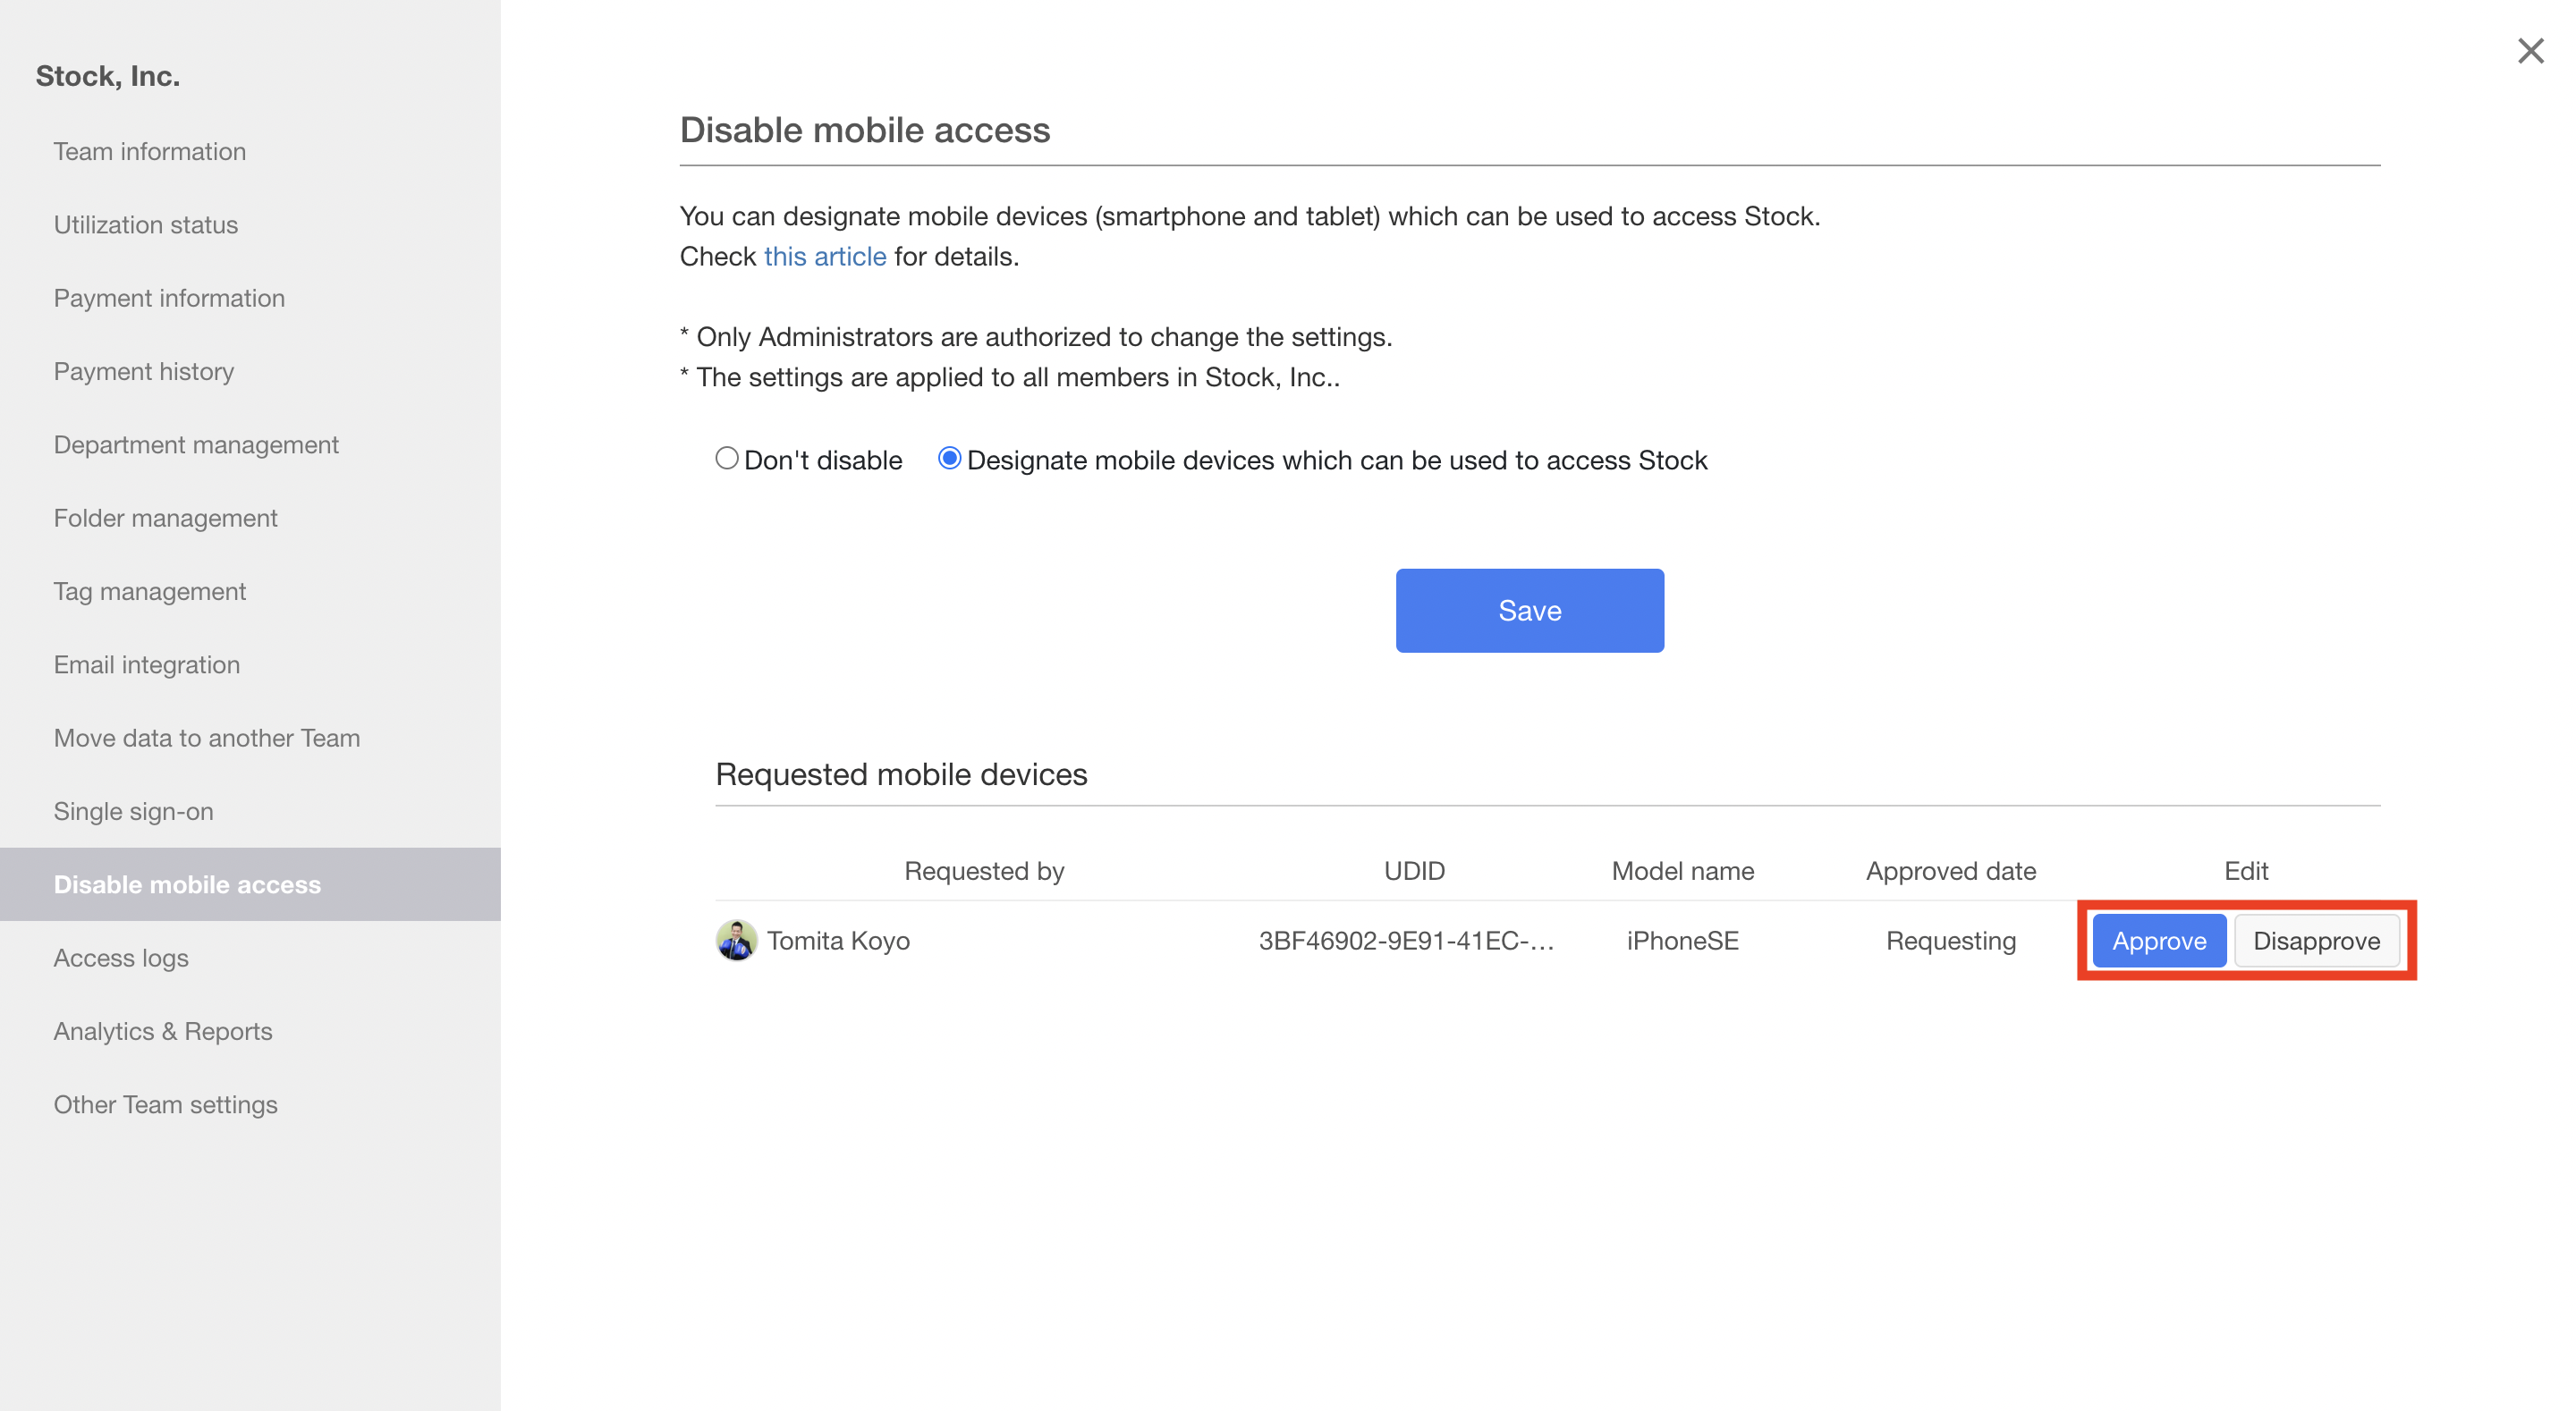 How to disable mobile access on Stock_4
